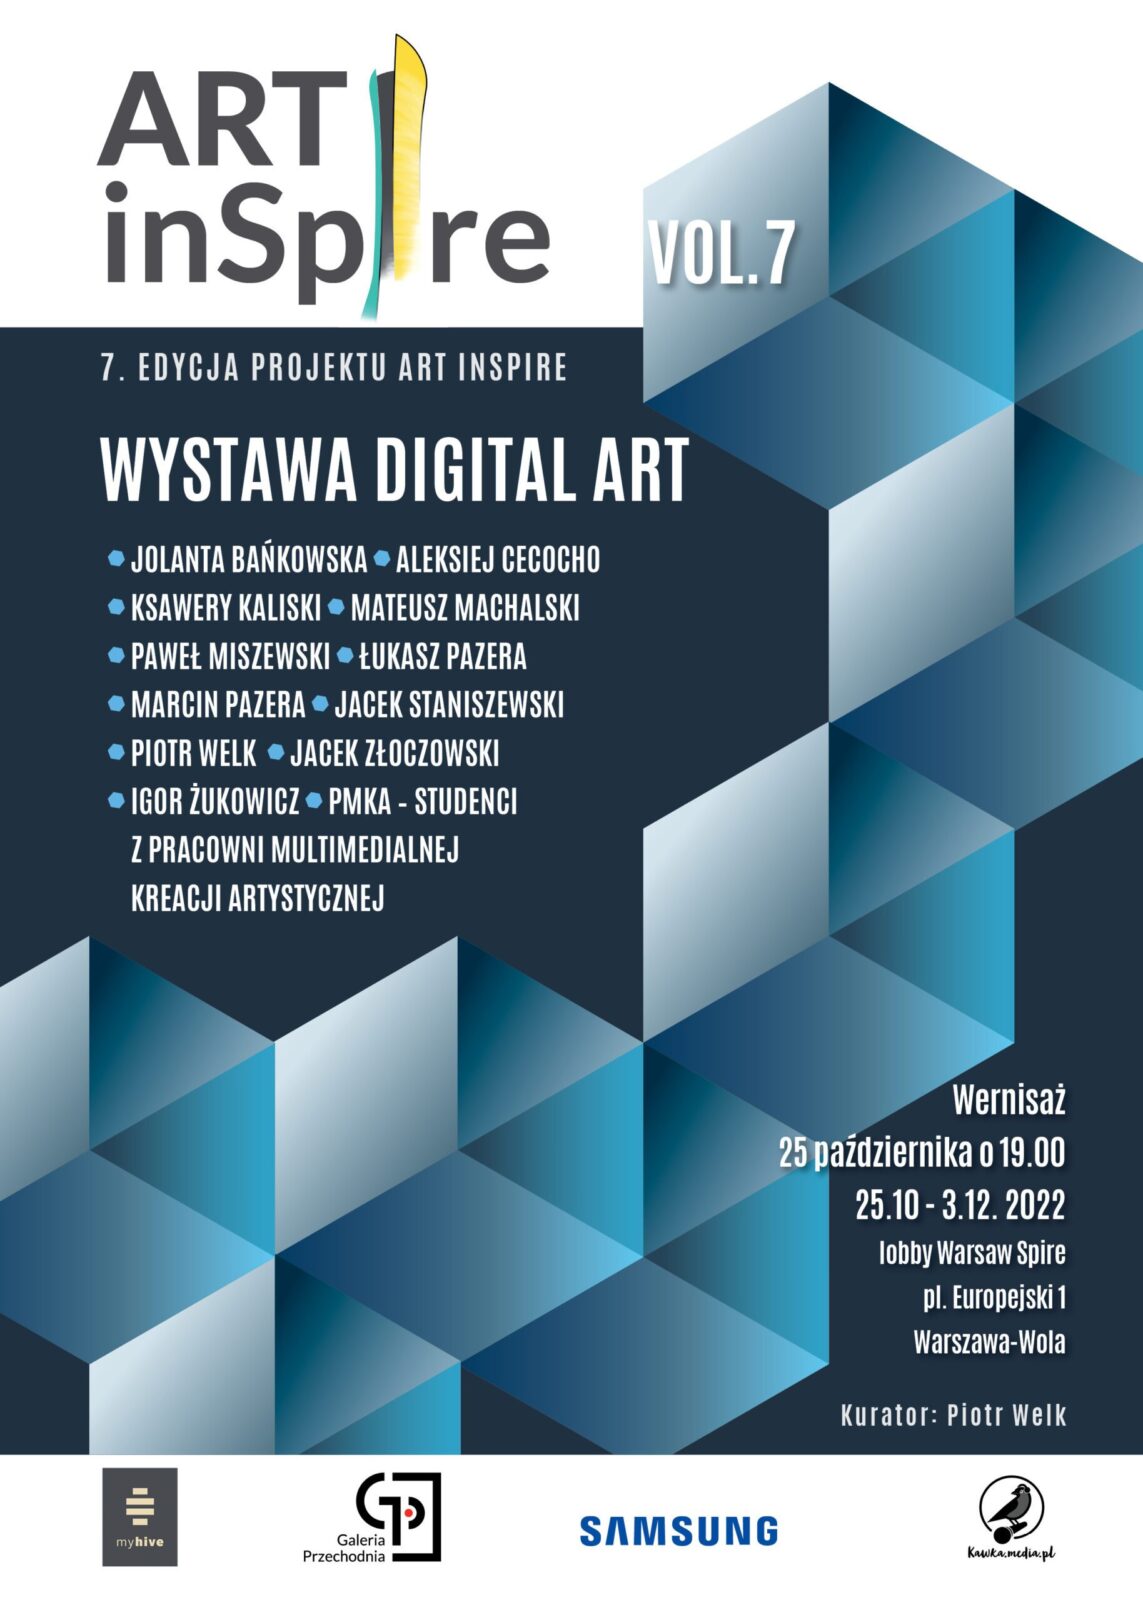 You are currently viewing ART inSpire vol.7